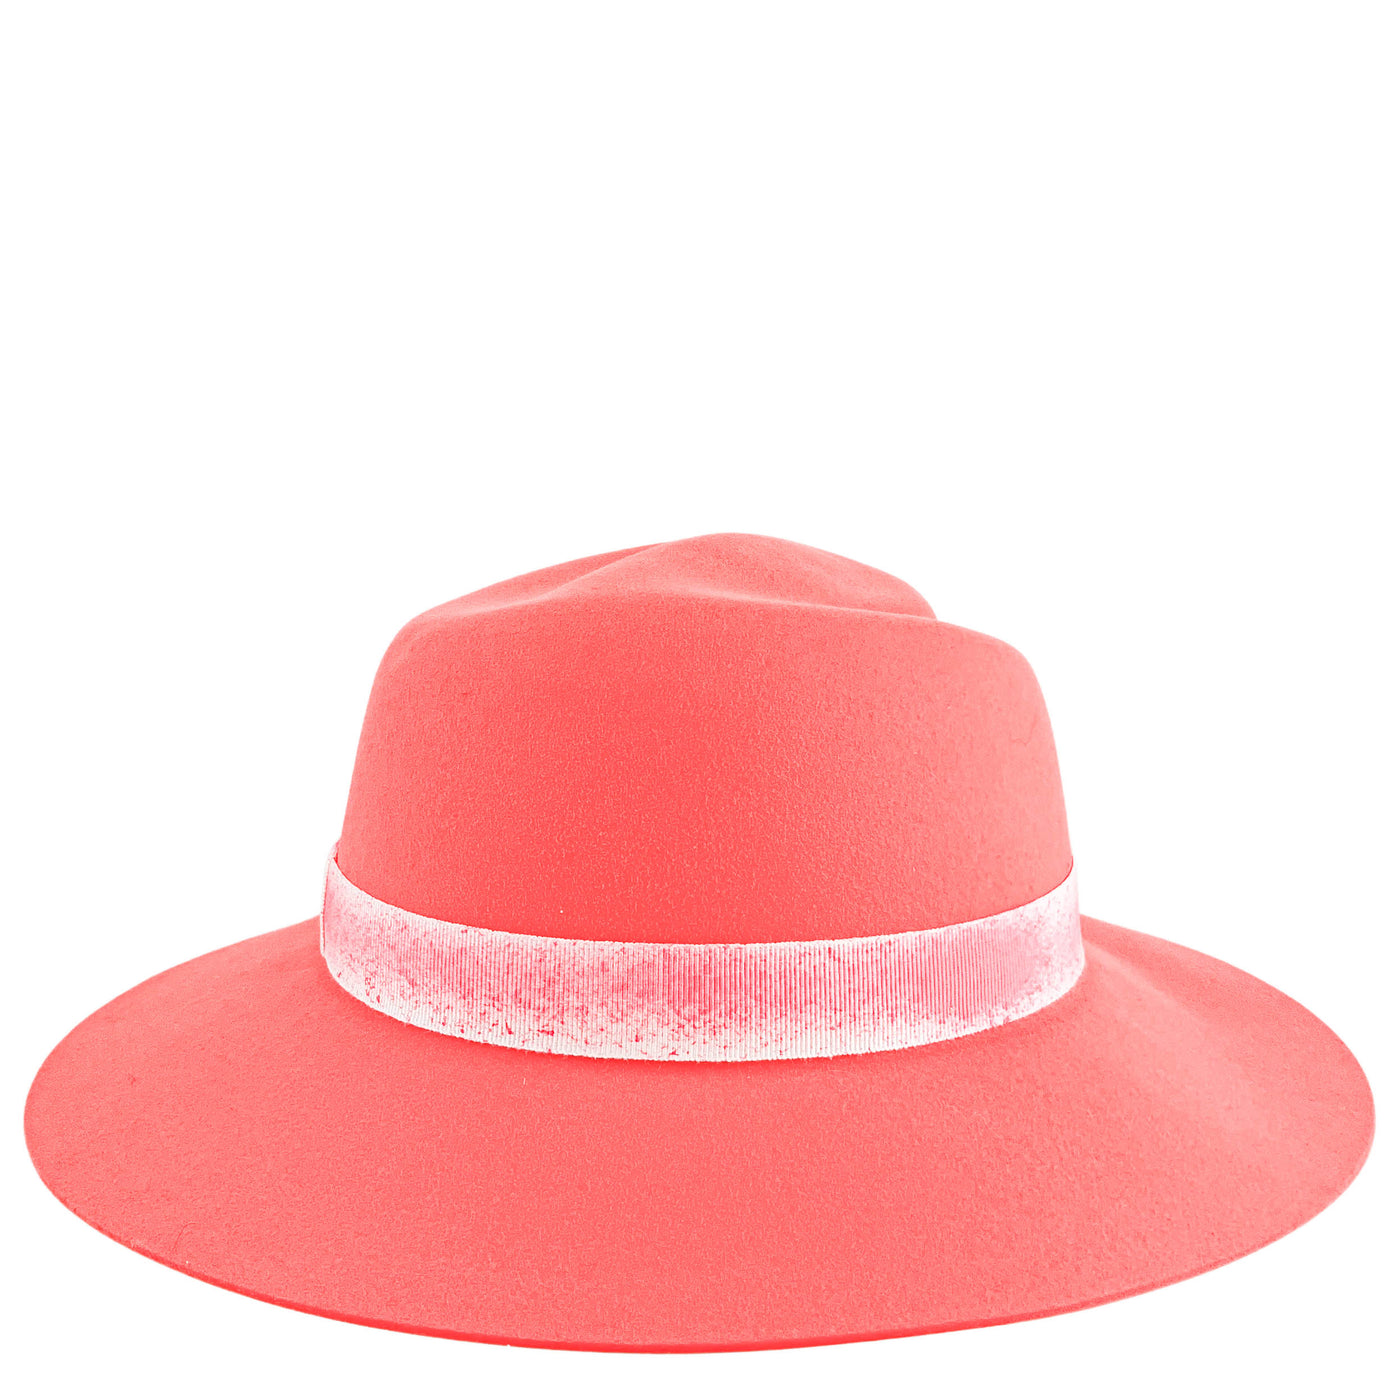 Masion Michel Kyra Felted Fedora Hat in Coral Pink - Discounts on Maison Michel at UAL